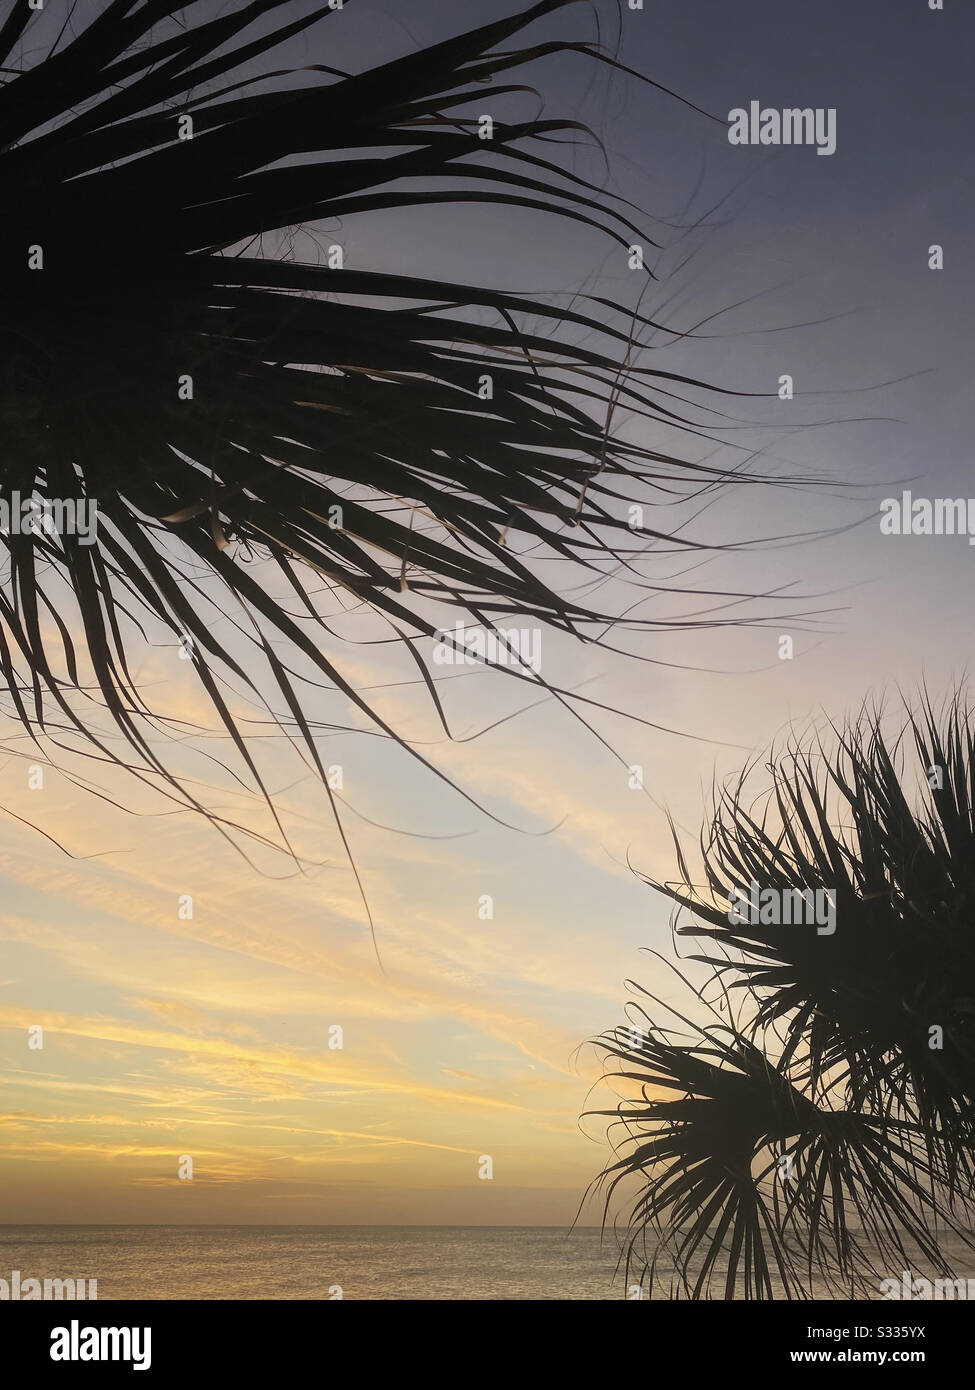 Sunset with silhouetted palm trees Stock Photo